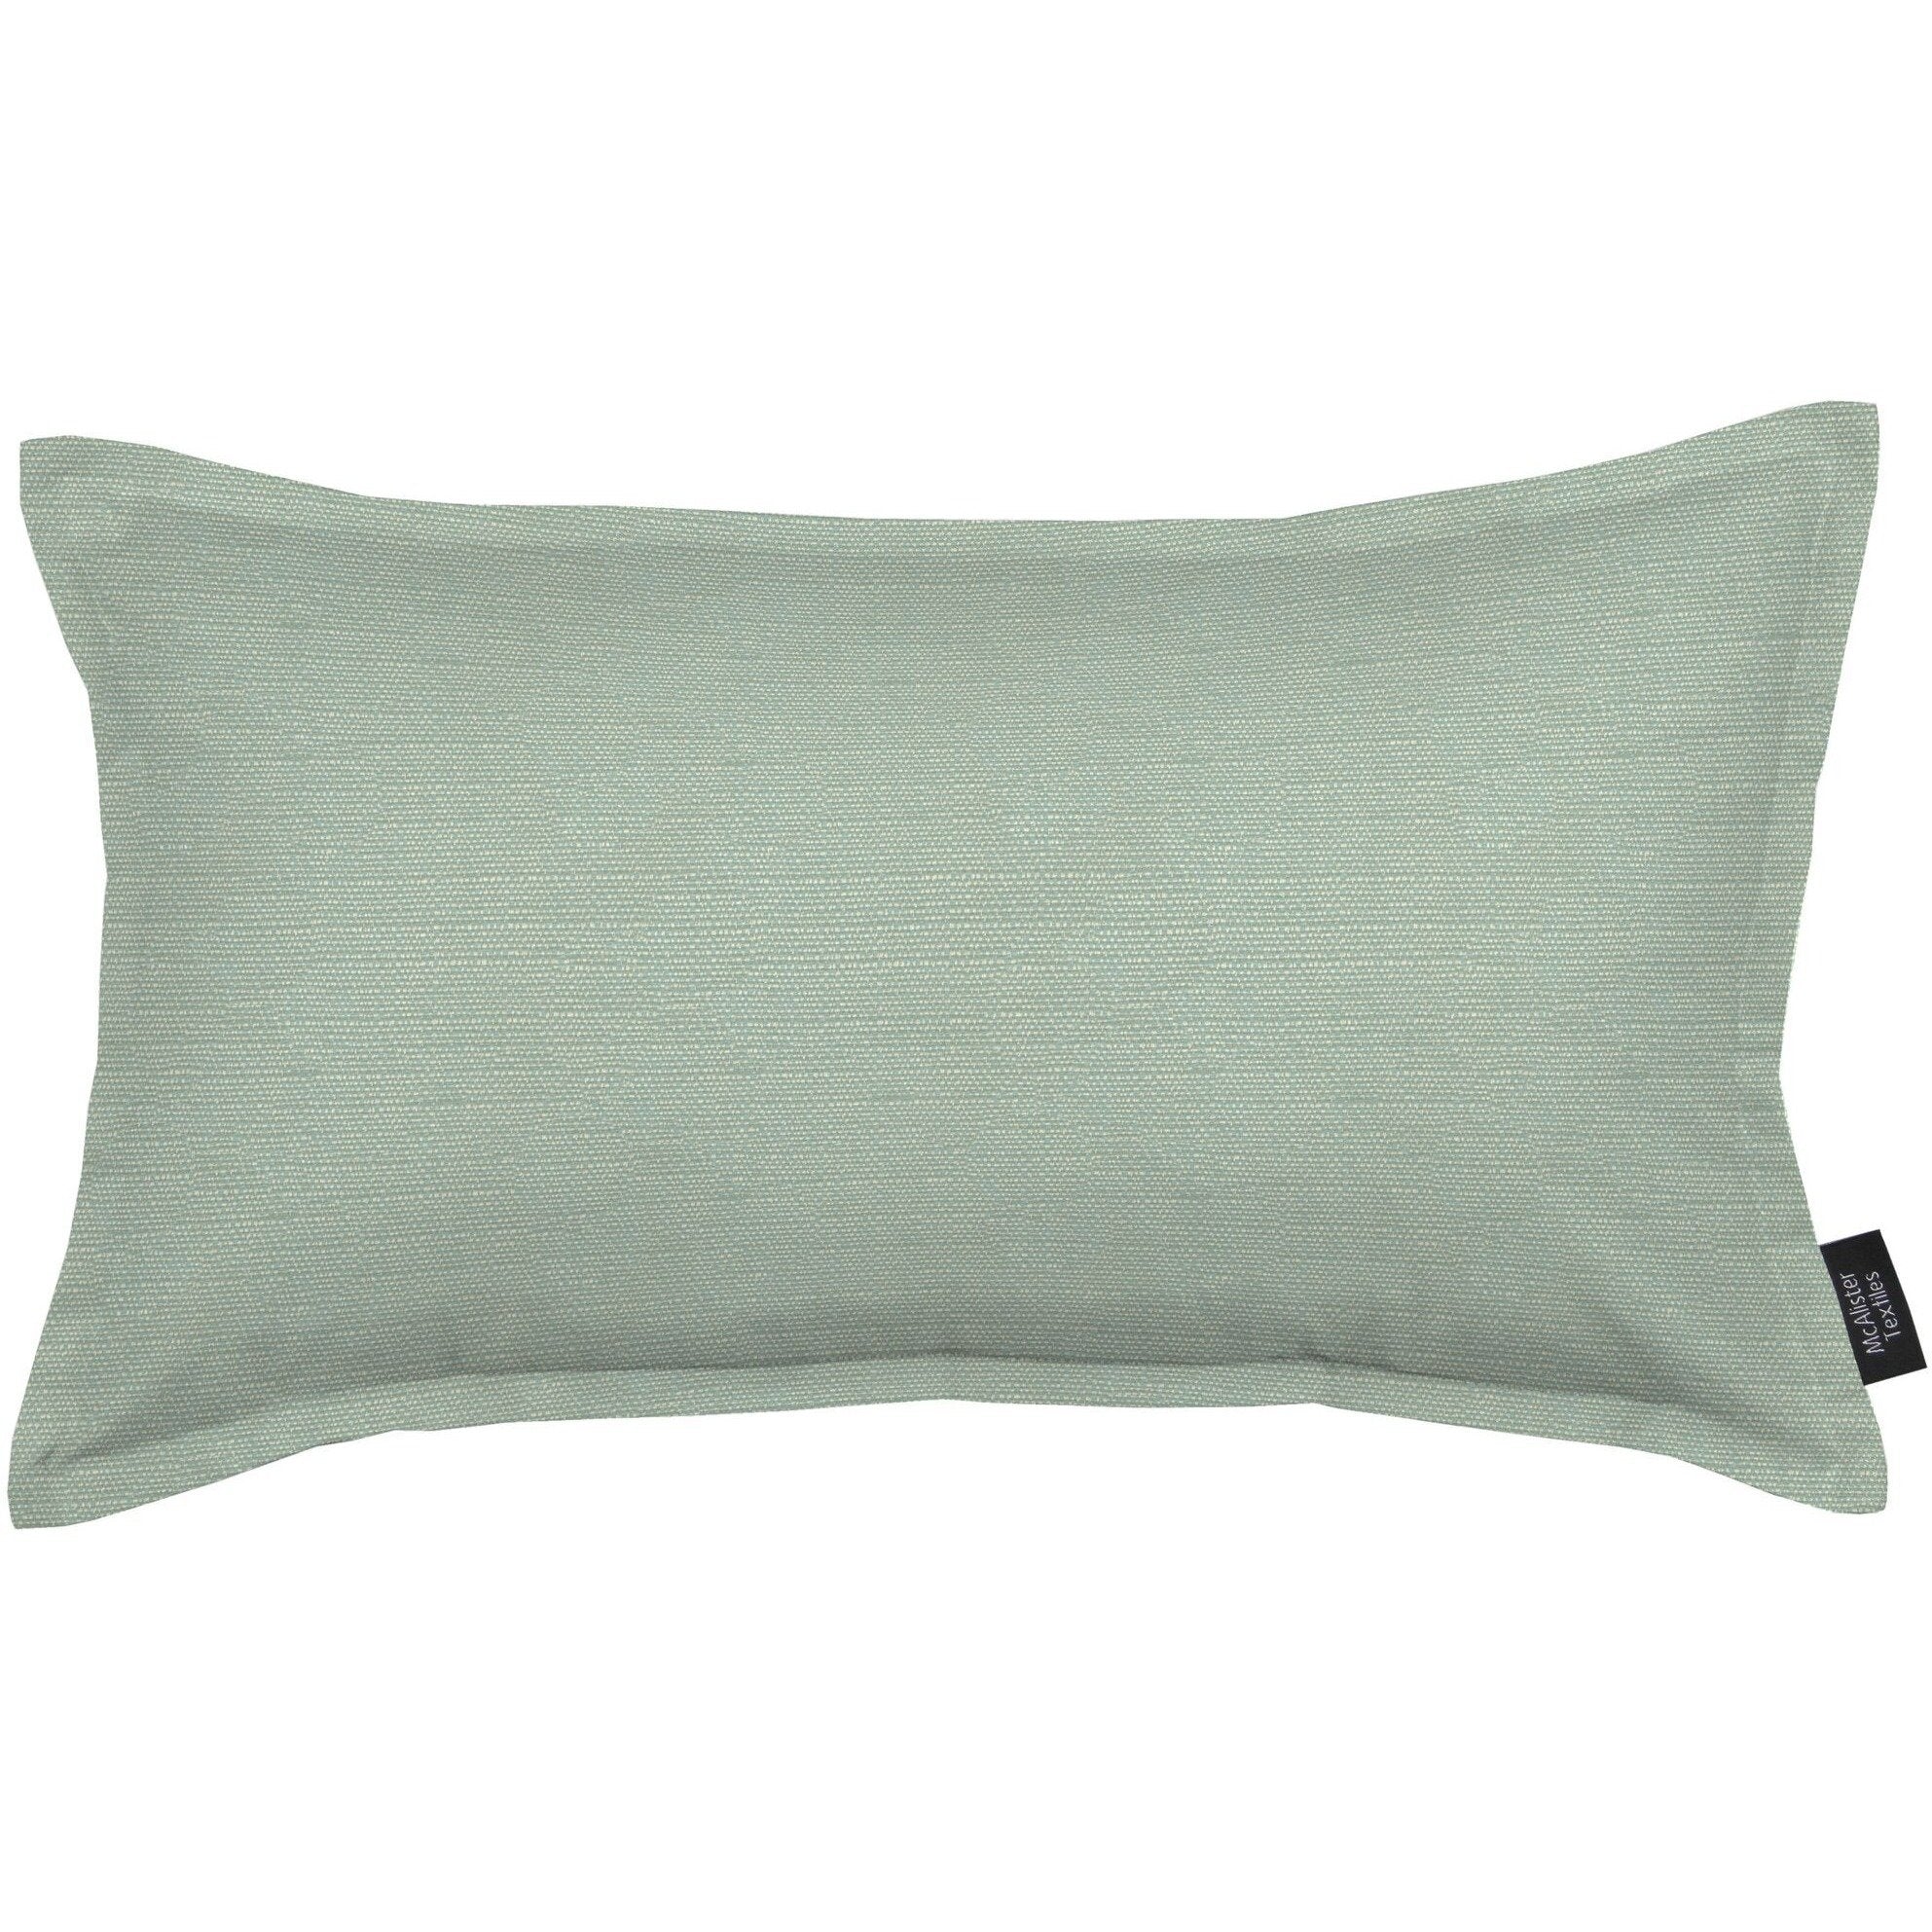 McAlister Textiles Savannah Duck Egg Blue Cushion Cushions and Covers Cover Only 50cm x 30cm 